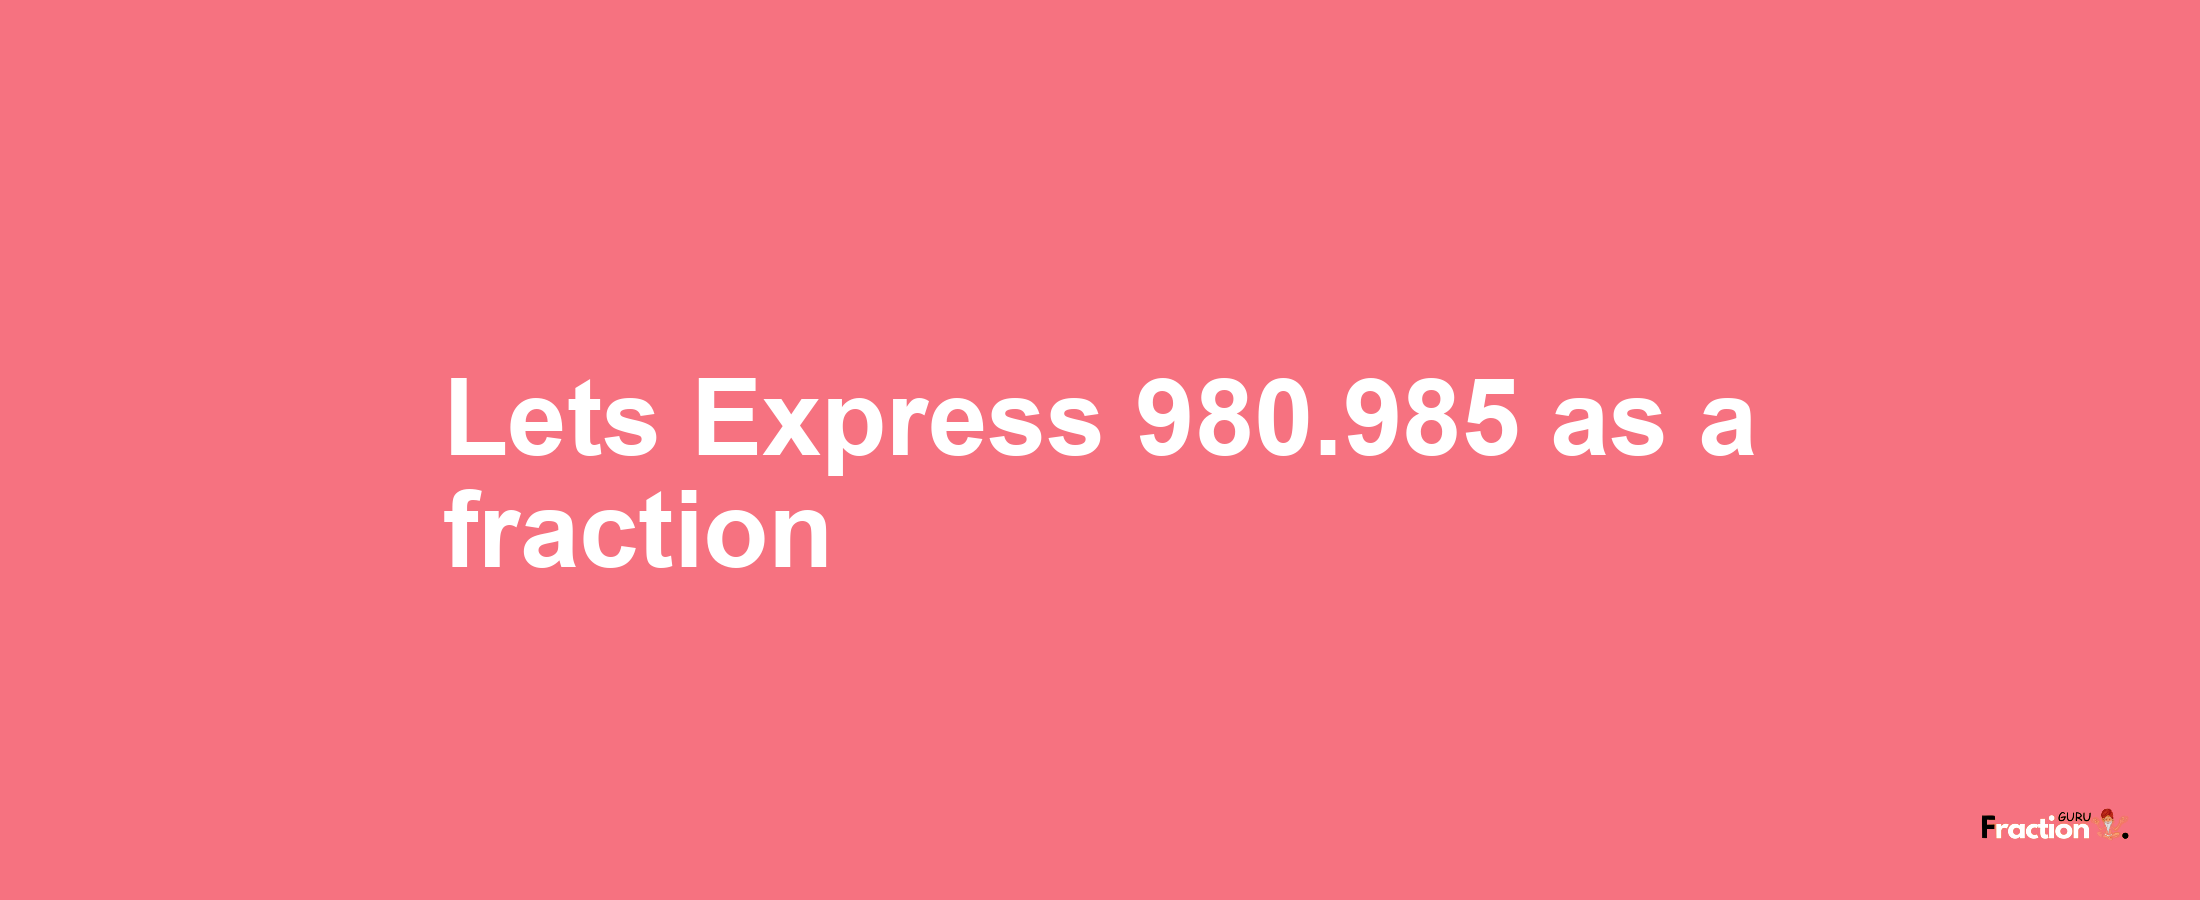 Lets Express 980.985 as afraction